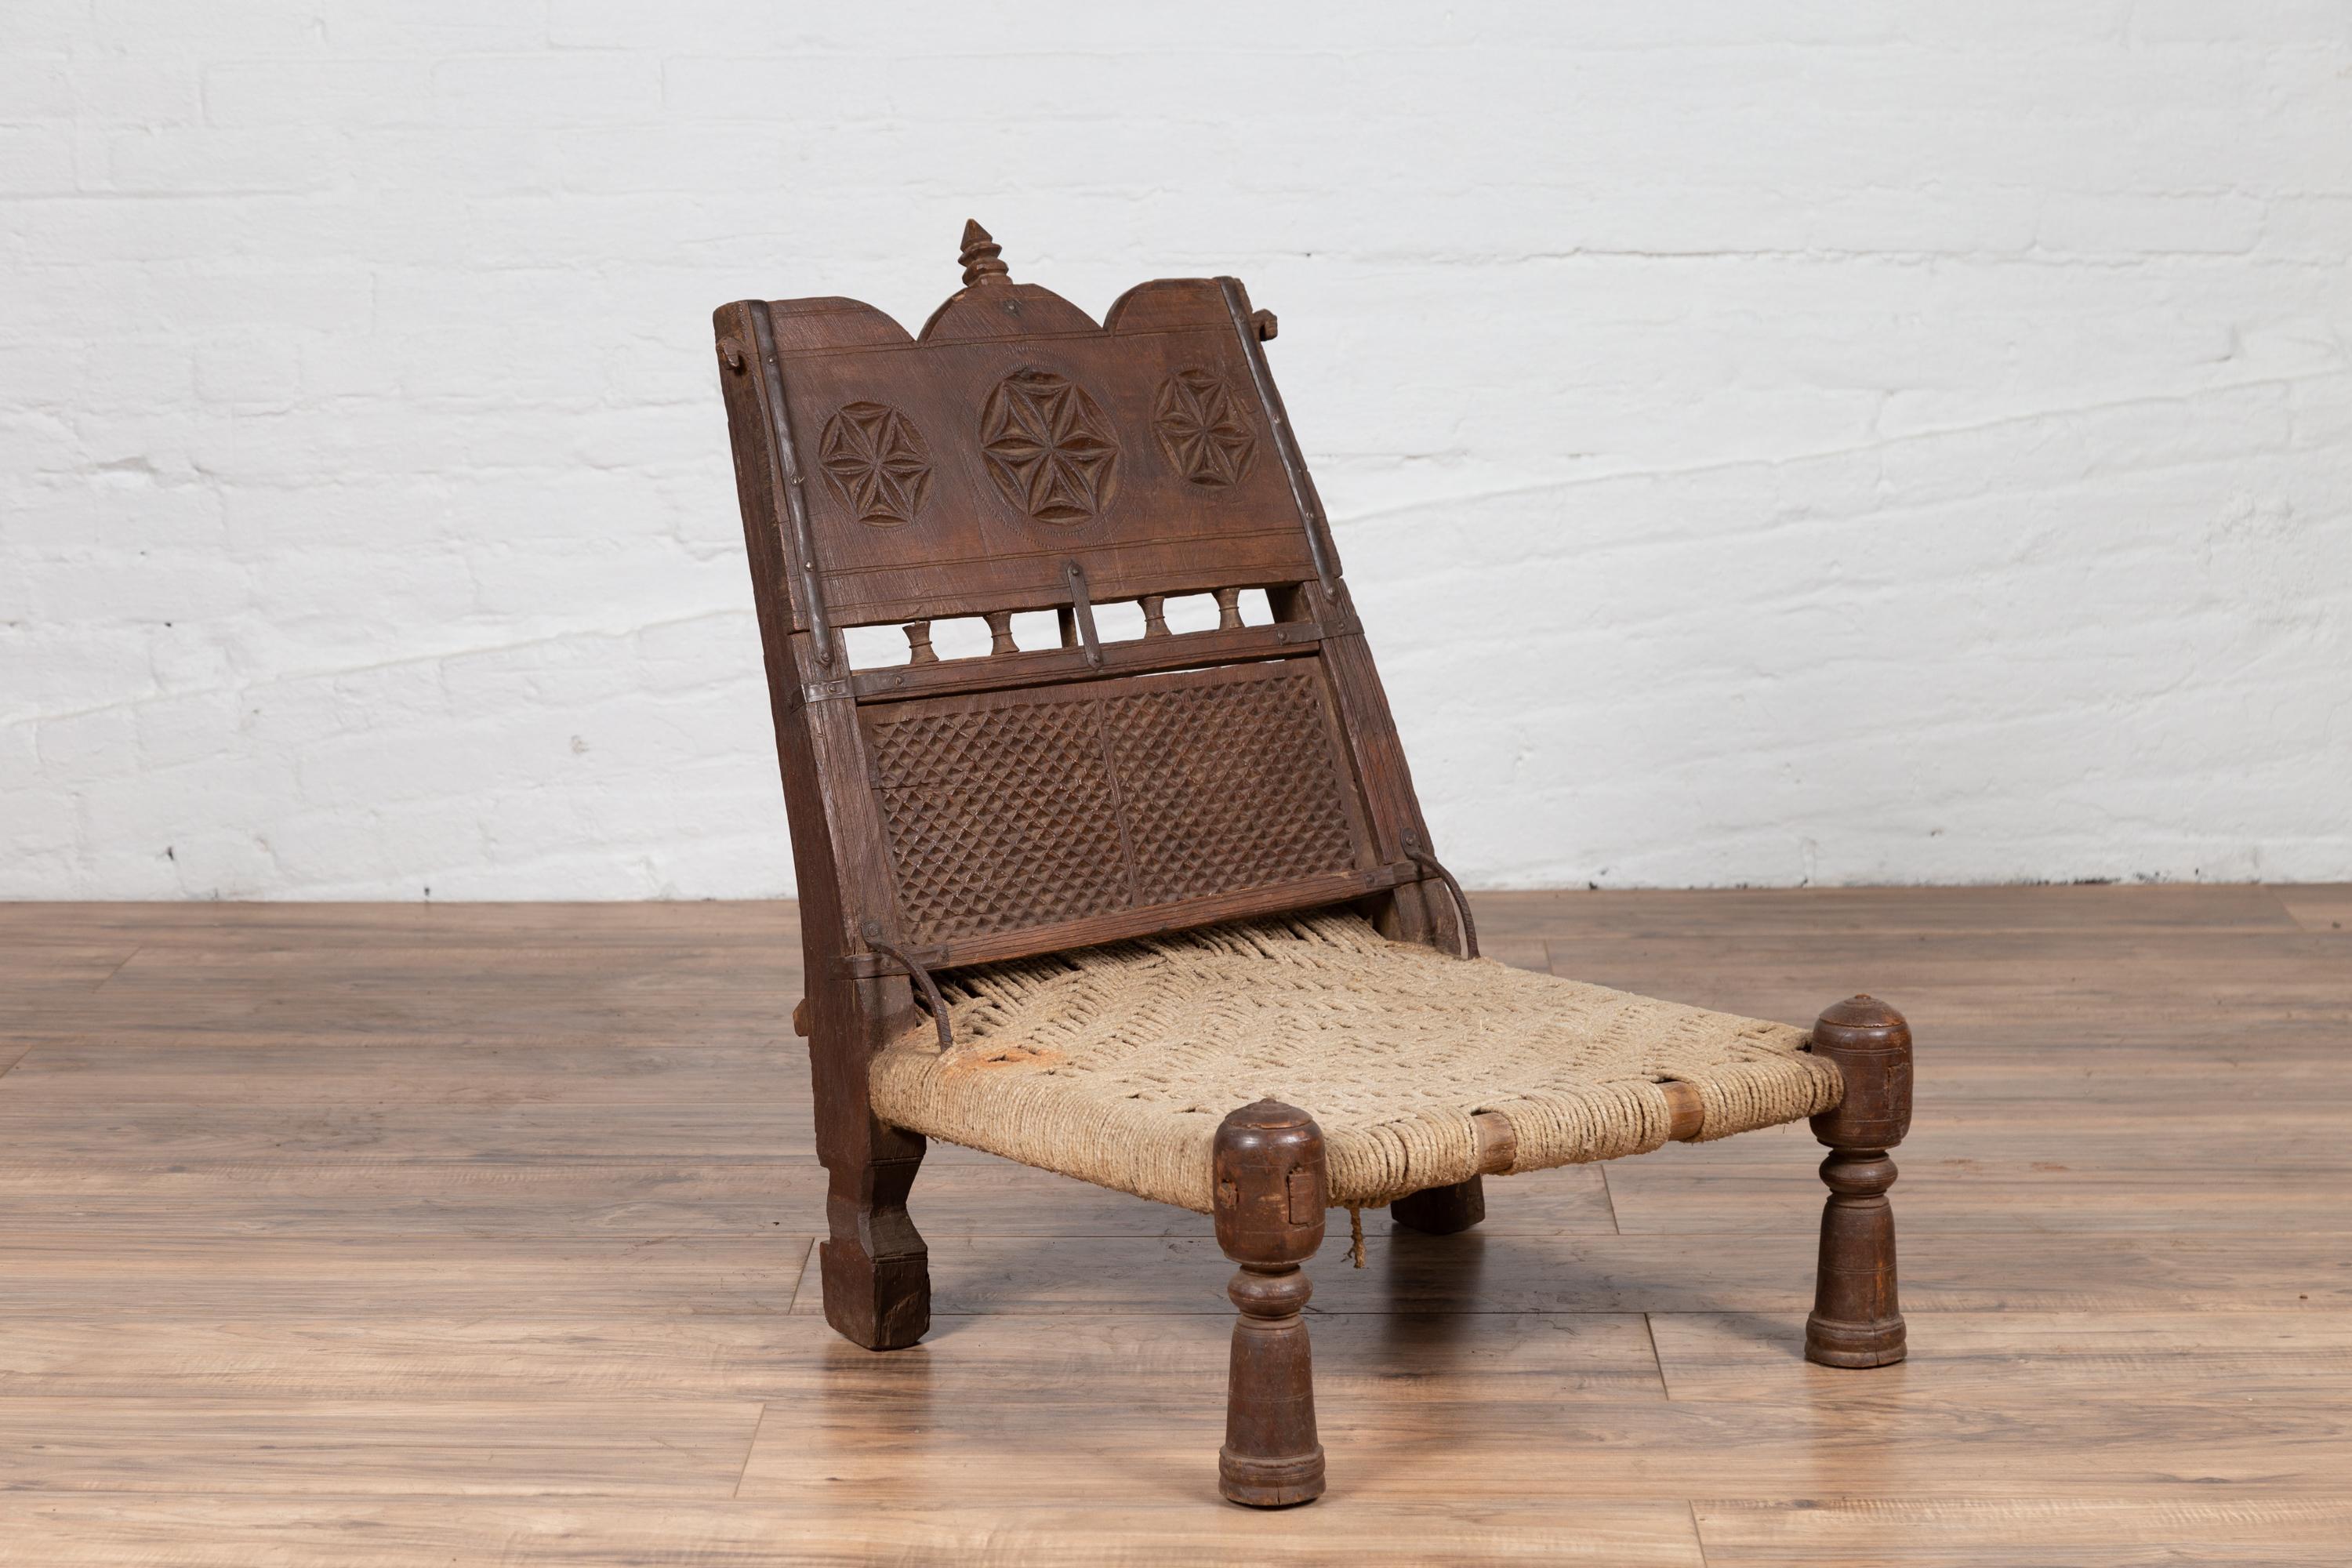 Antique Indian Rustic Low Seat Wooden Chair with Carved Rosettes and Twine Seat For Sale 1